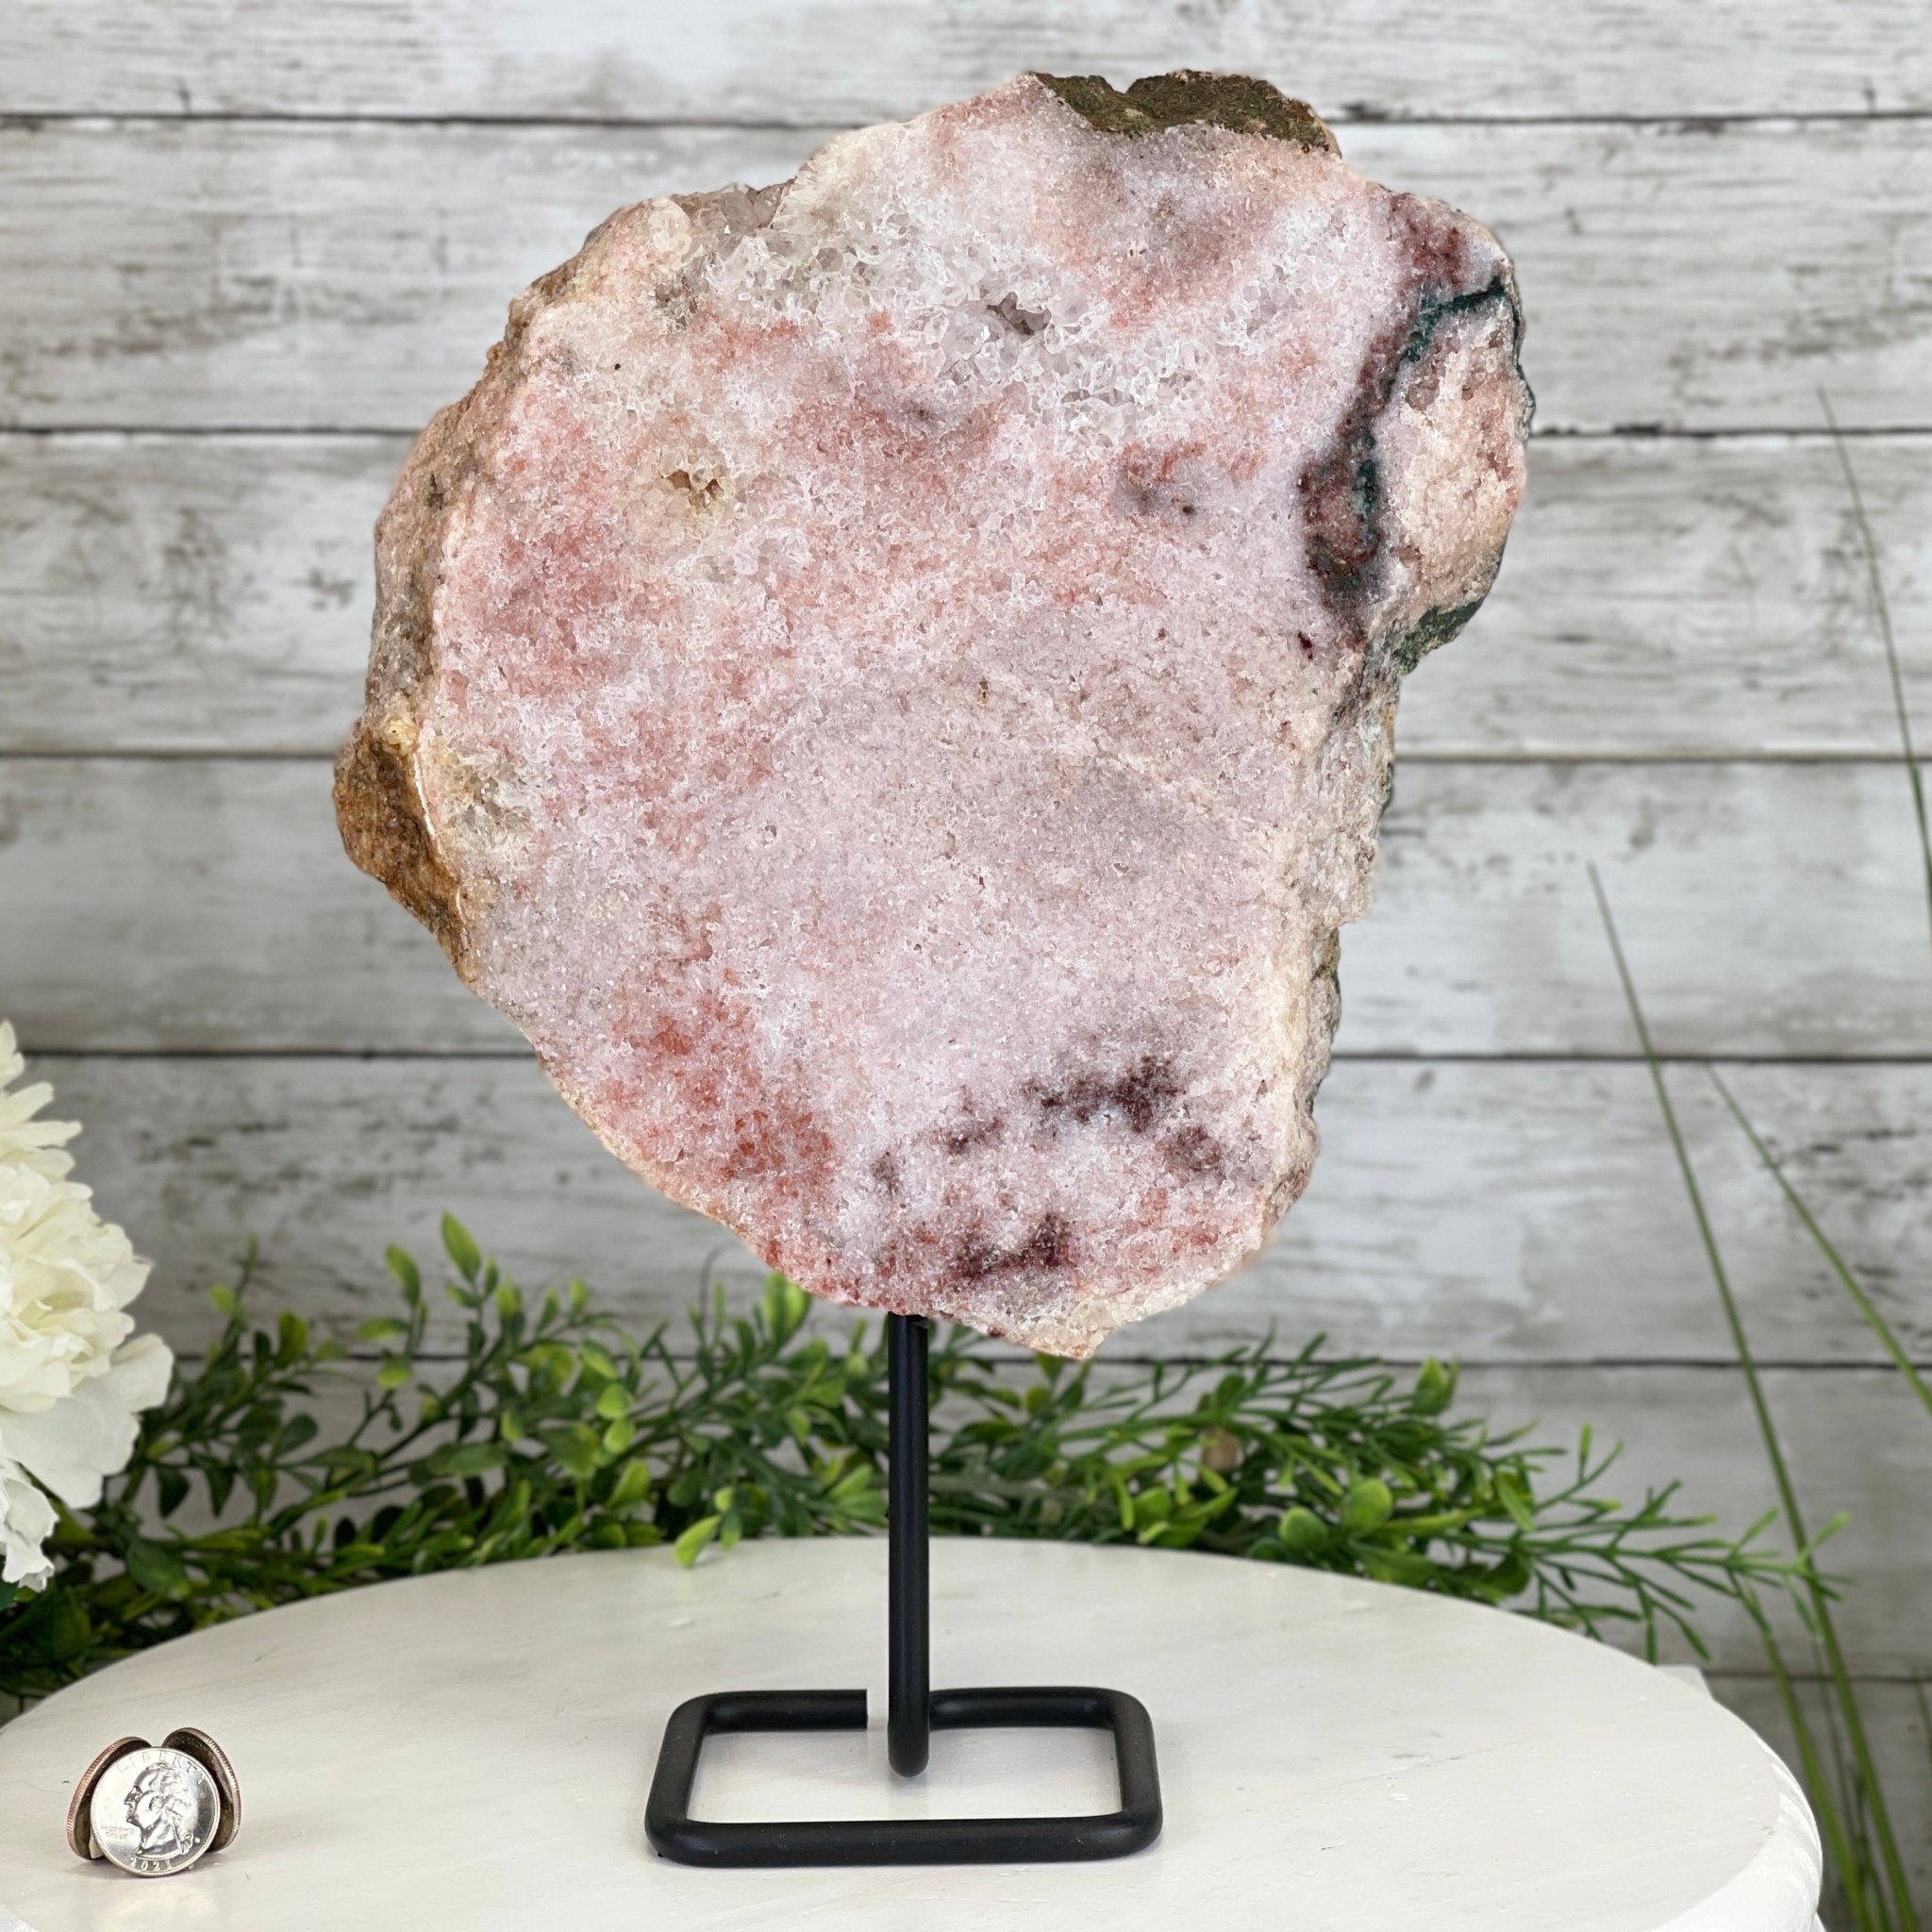 Pink Amethyst Slice on a Stand, 8.7 lbs and 13.3" Tall #5742-0034 by Brazil Gems - Brazil GemsBrazil GemsPink Amethyst Slice on a Stand, 8.7 lbs and 13.3" Tall #5742-0034 by Brazil GemsSlices on Fixed Bases5742-0034